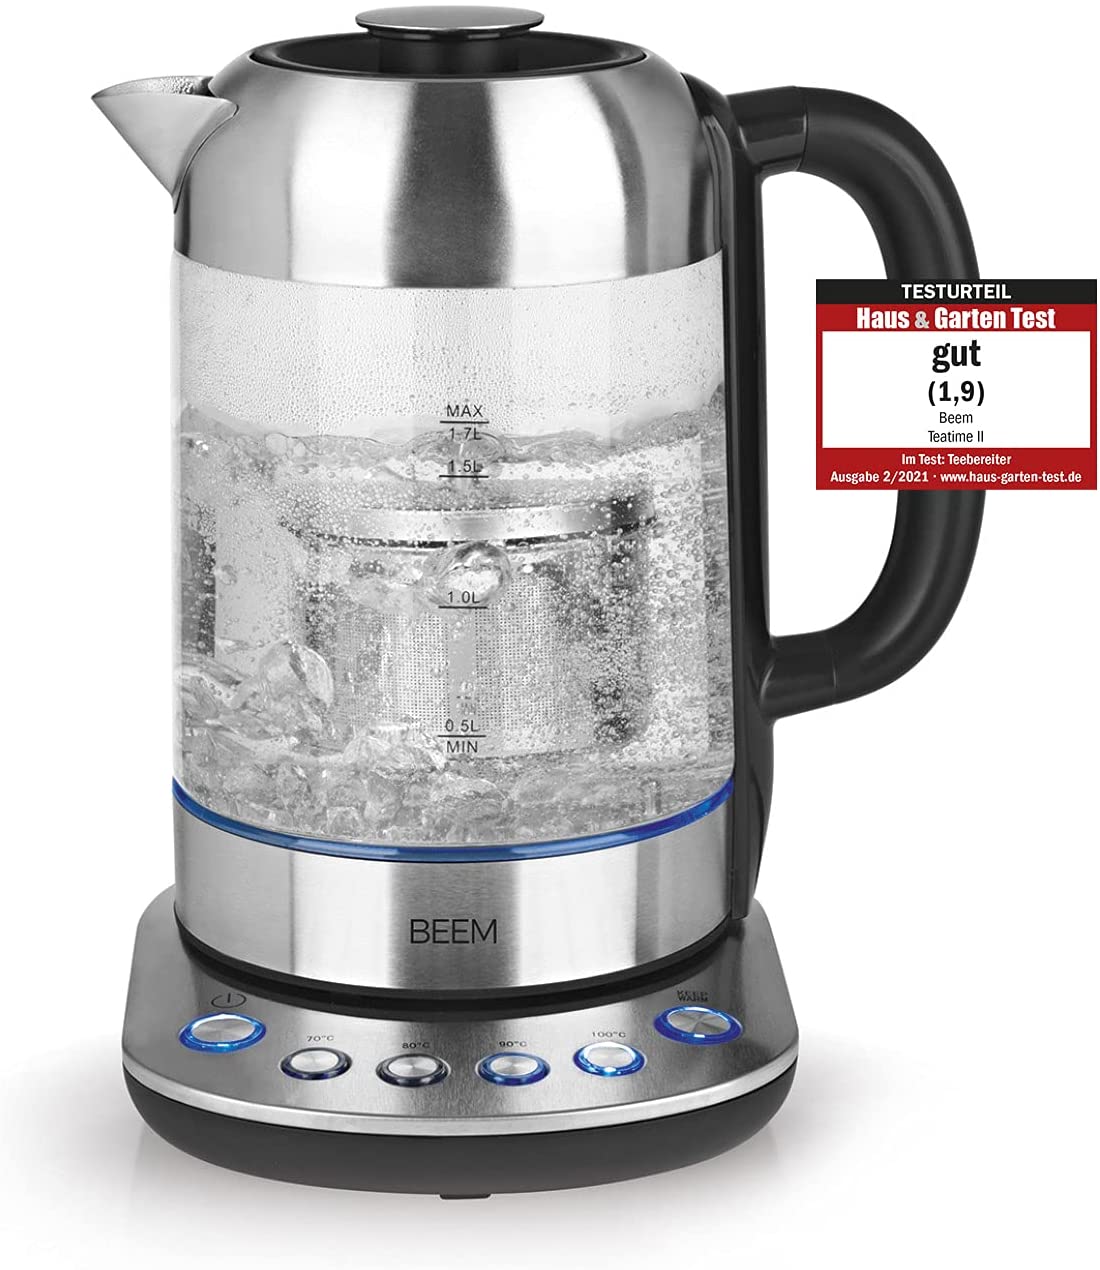 BEEM Teatime II Tea and Kettle with Temperature Setting, 1.7 Litres, Includes Stainless Steel Tea Strainer, LED Lighting, Glass and Stainless Steel